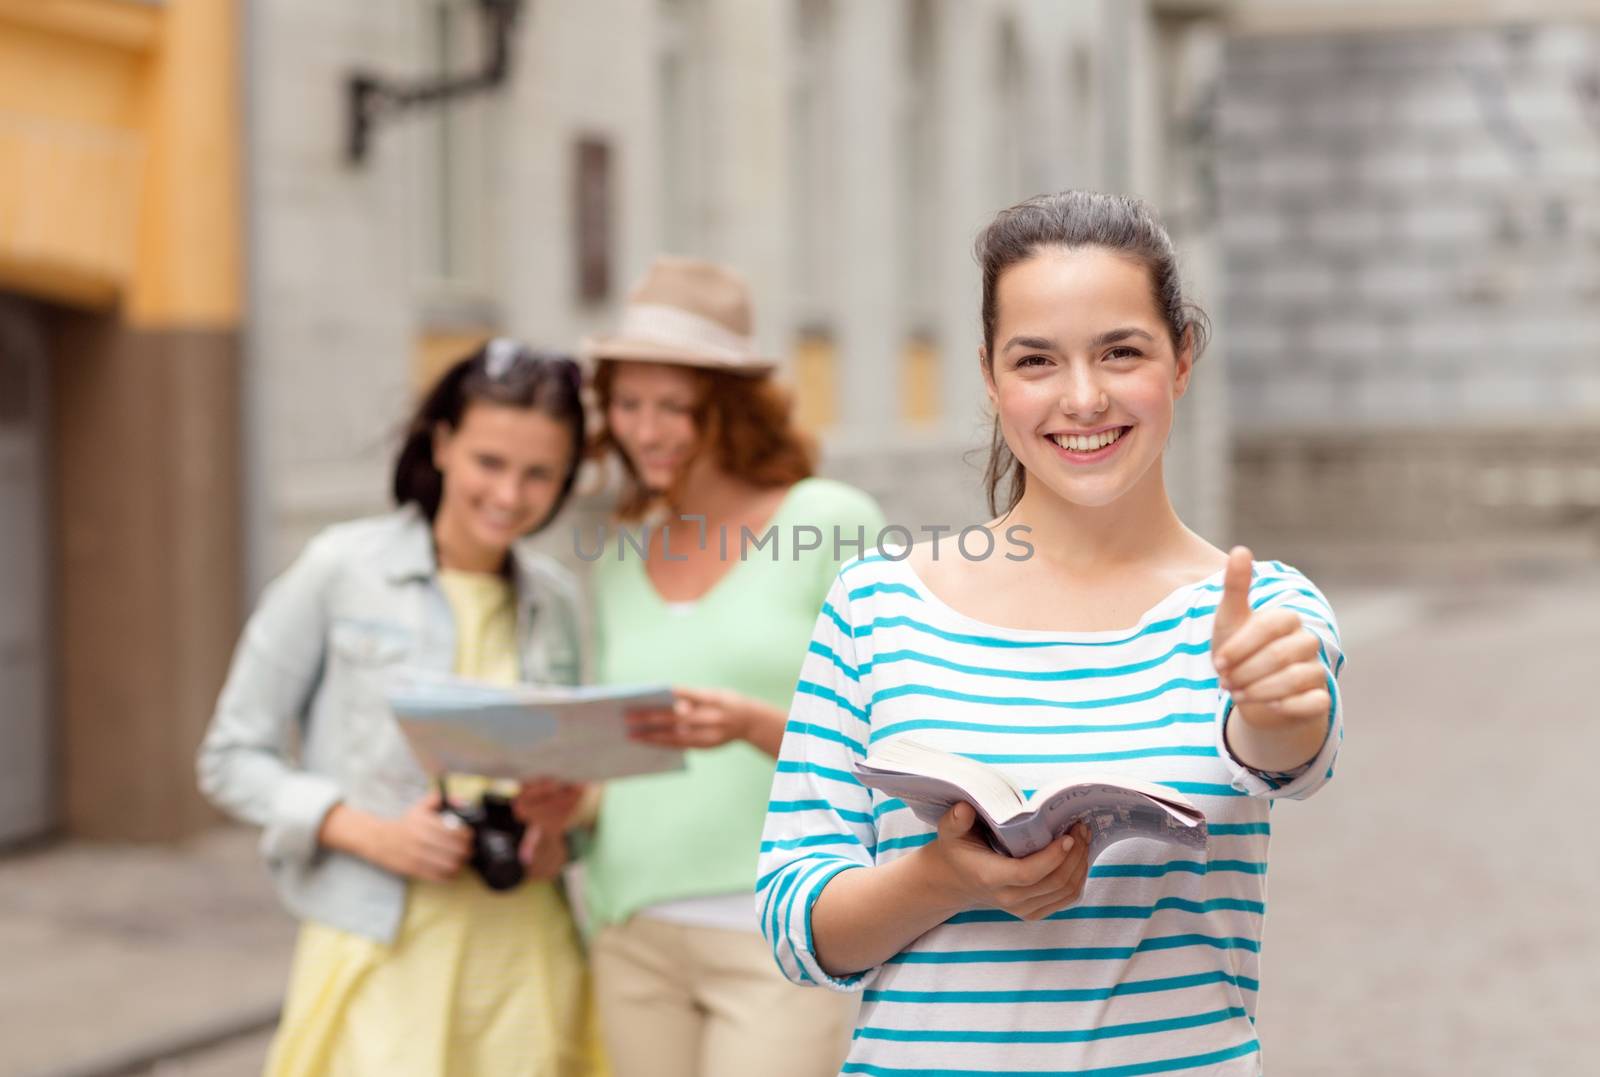 smiling teenage girls with city guide and camera by dolgachov